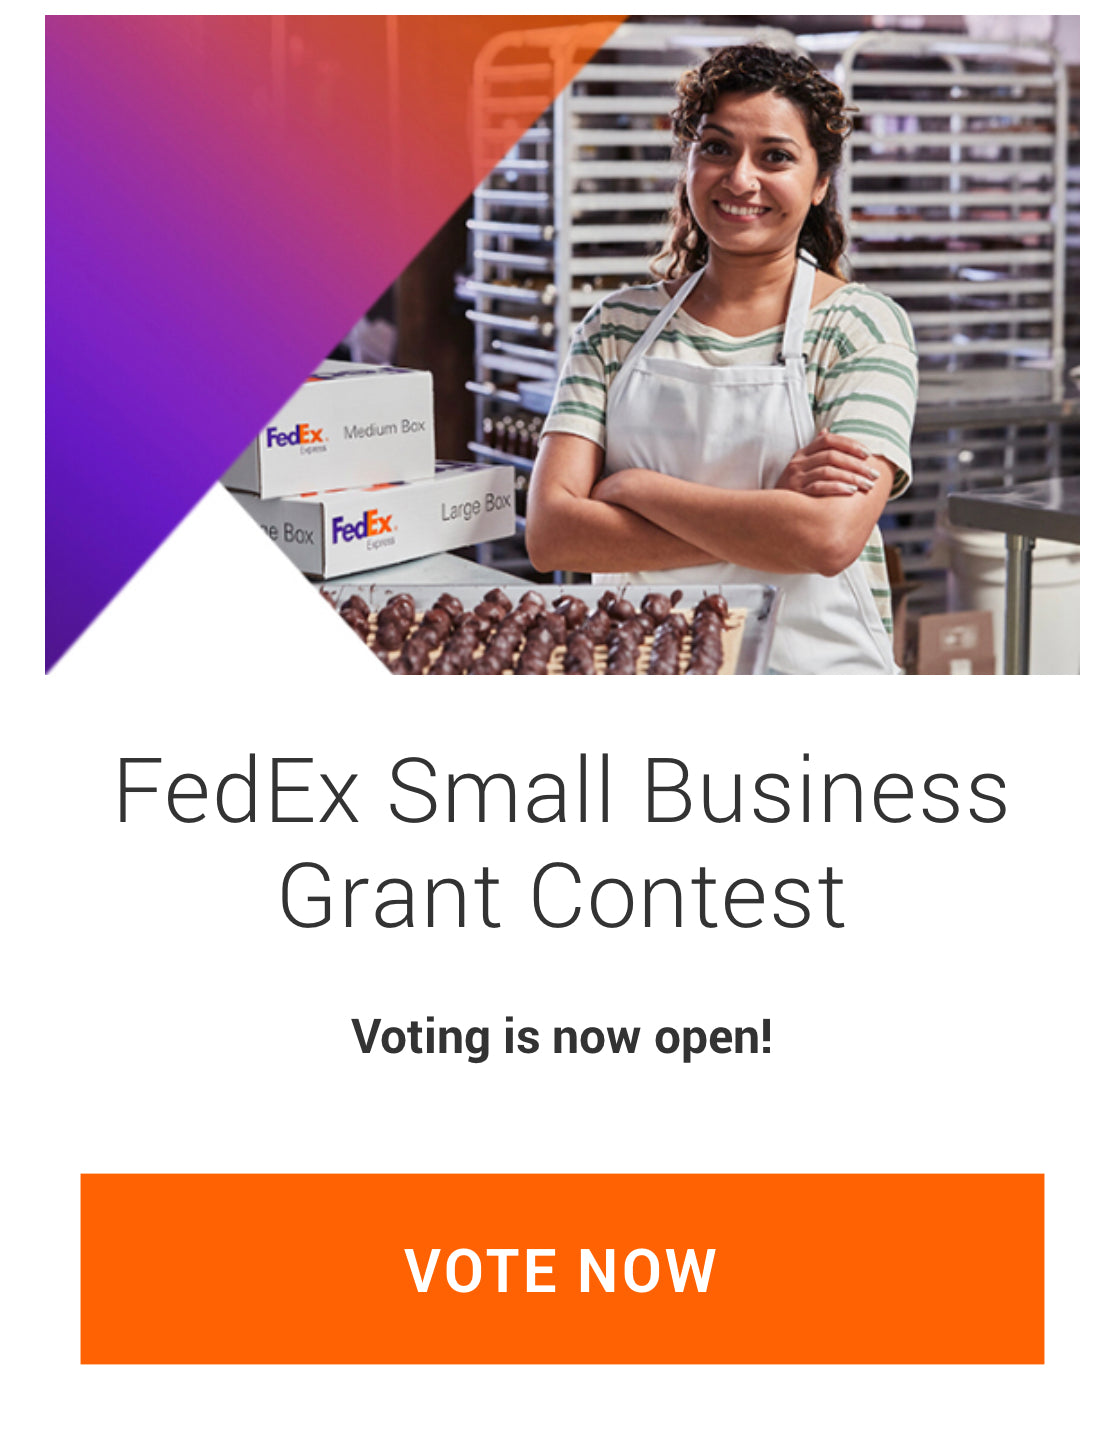 We just applied for the FedEx Small Business Grant!